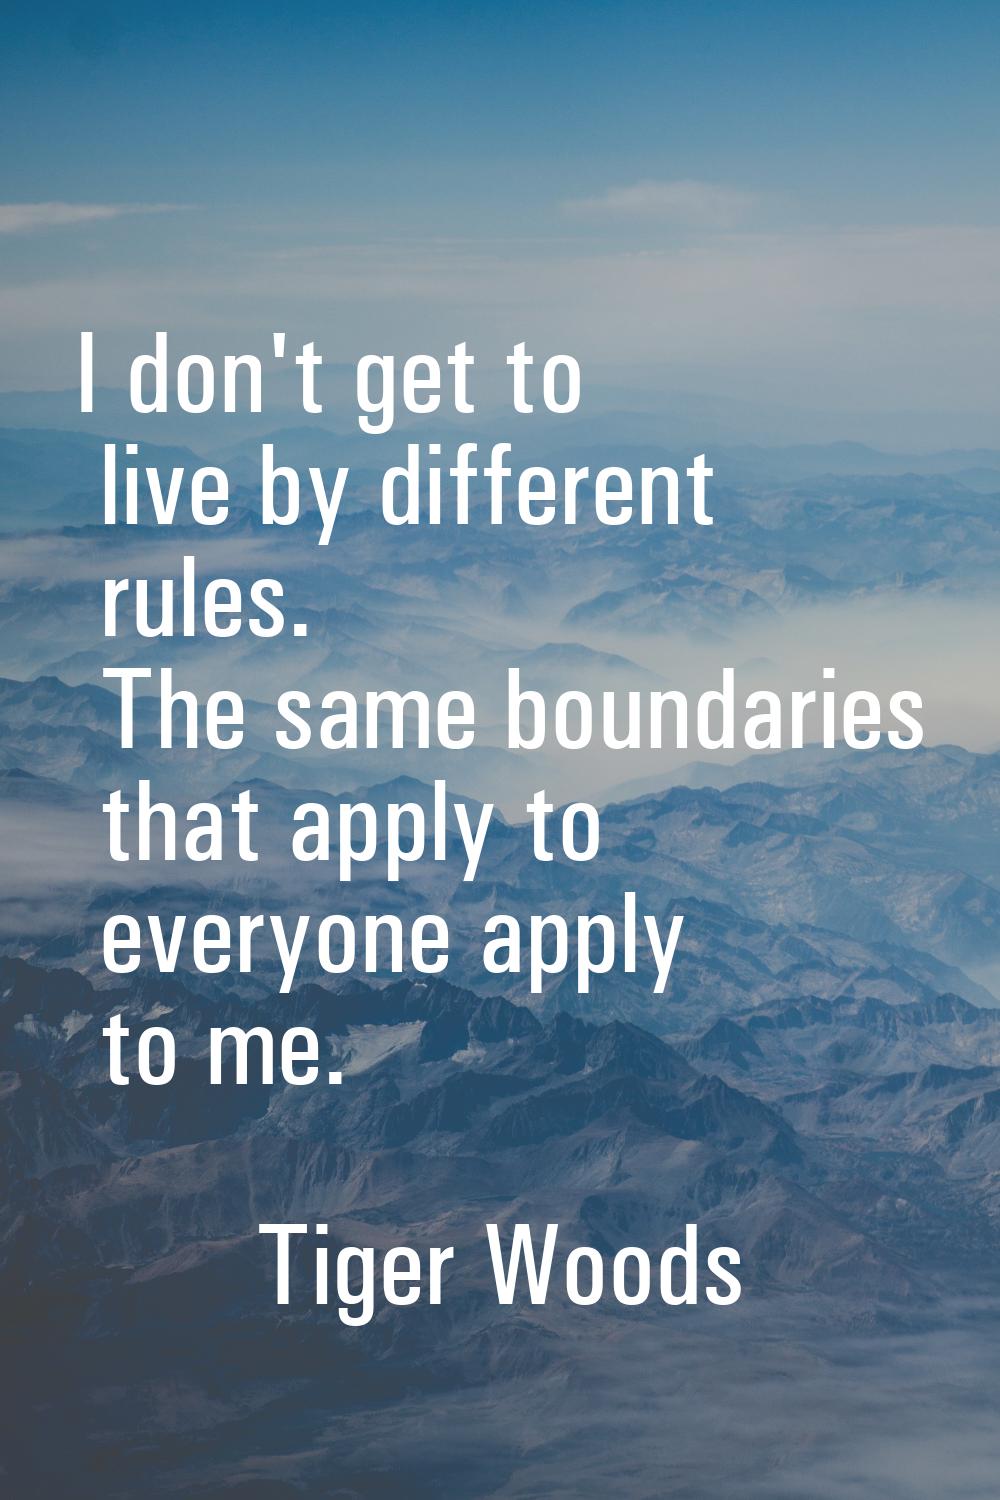 I don't get to live by different rules. The same boundaries that apply to everyone apply to me.